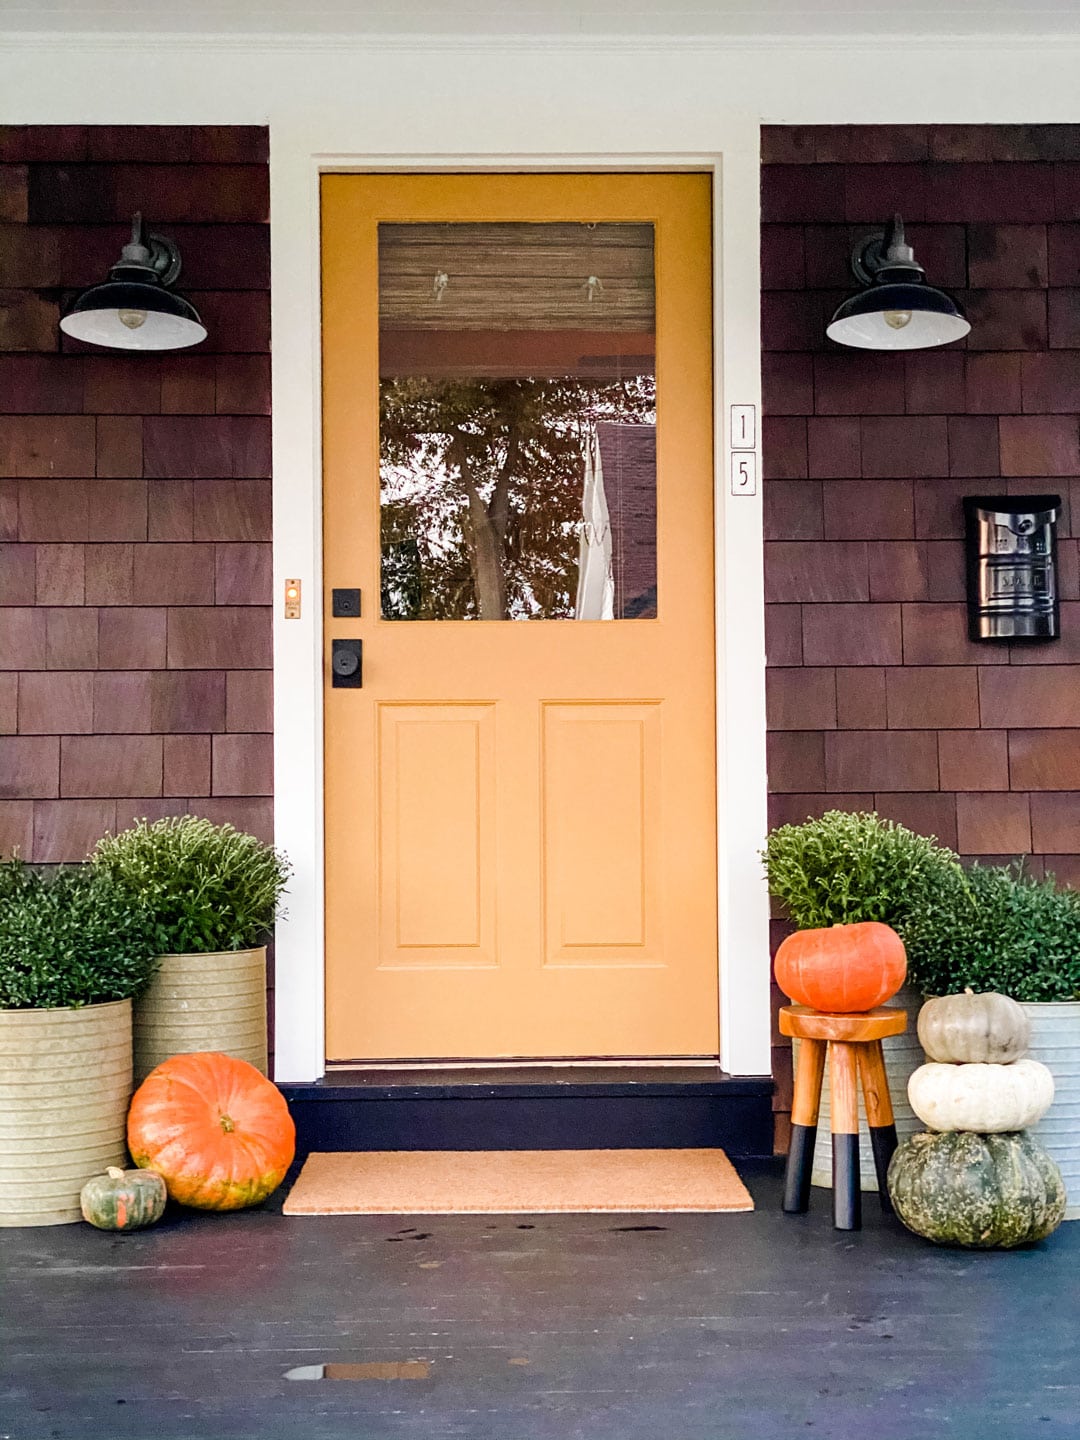 Lifestyle Blogger Annie Diamond shares her newly painted door just for fall!